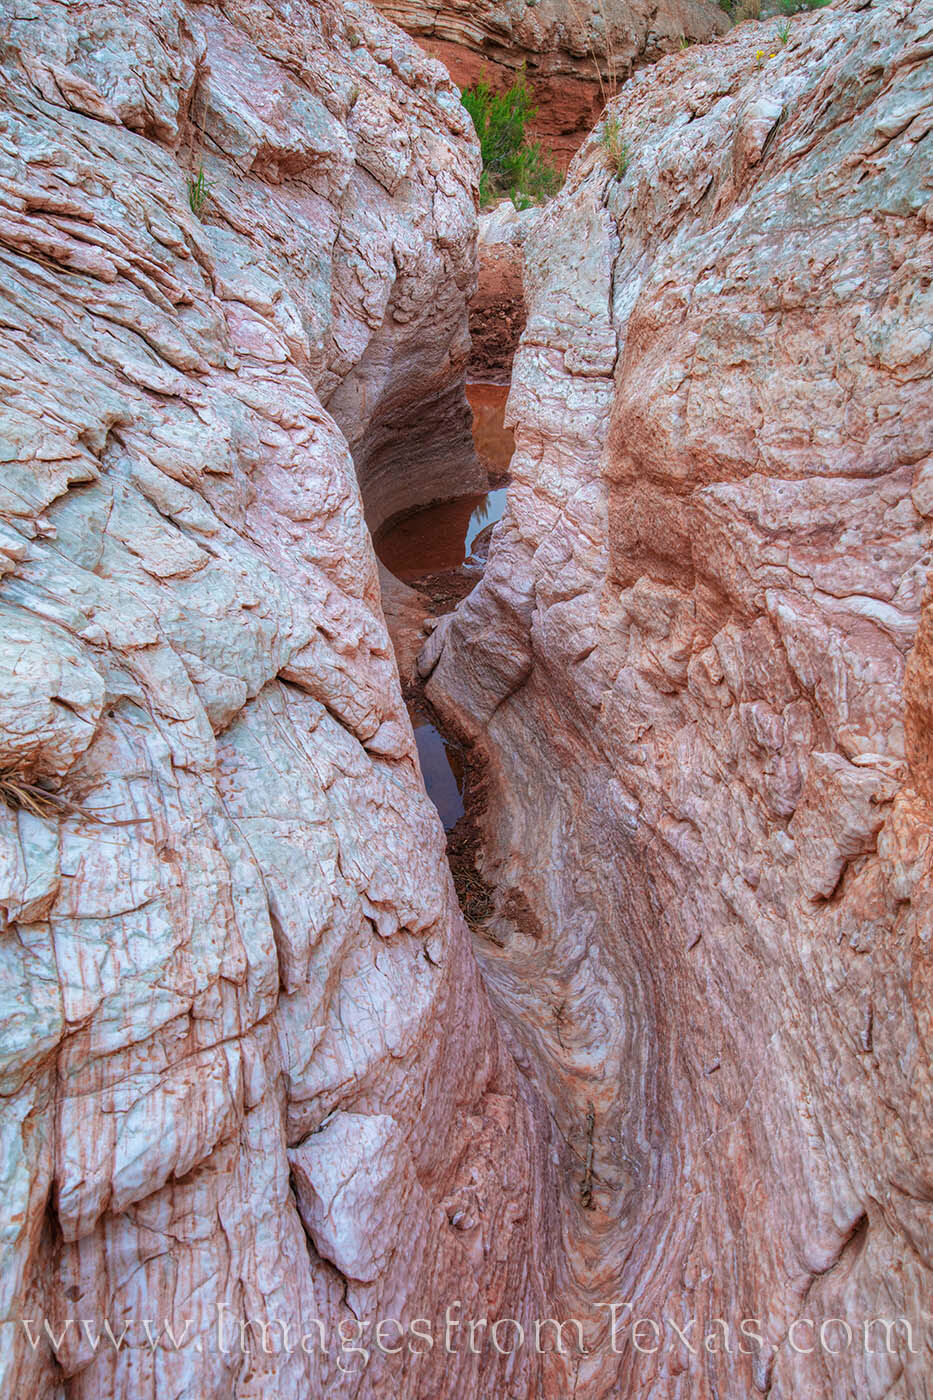 Hidden not far off the trail in Caprock Canyons is this small gypsum slot canyon. The lines and curves in conjuction with the...